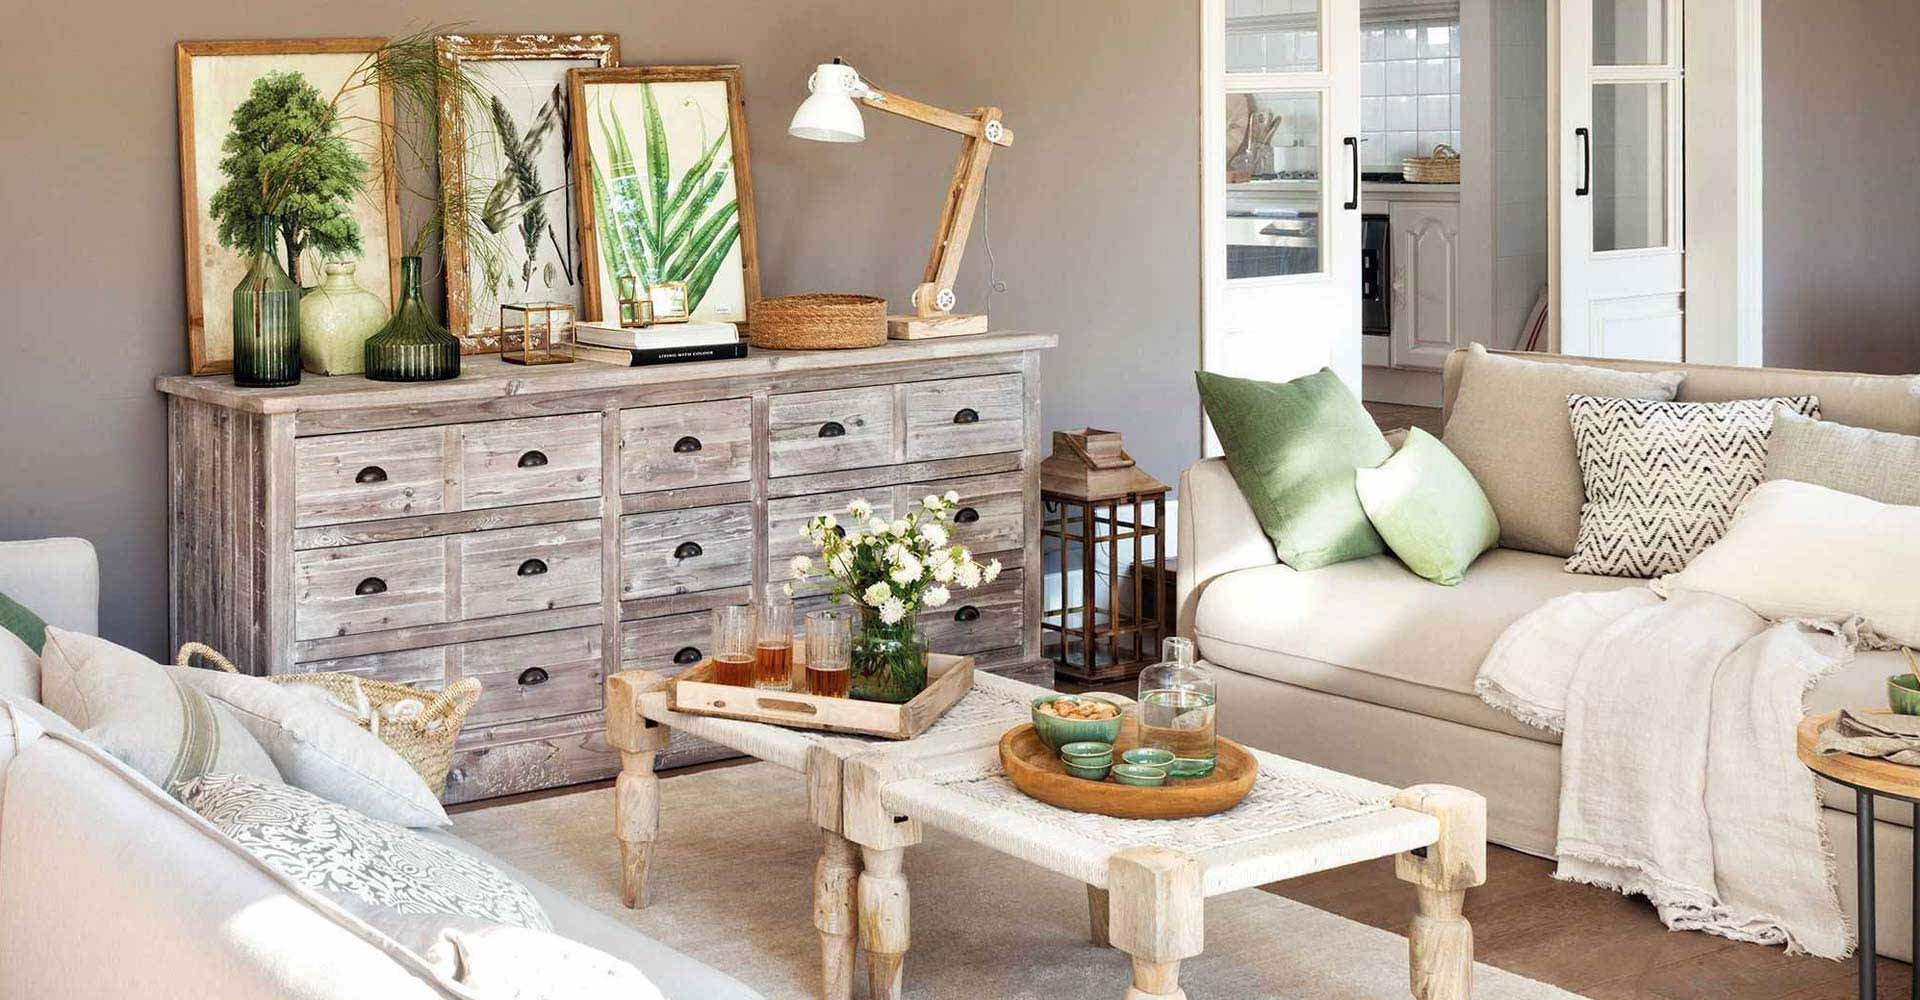 Décor and interior design trends for 2021